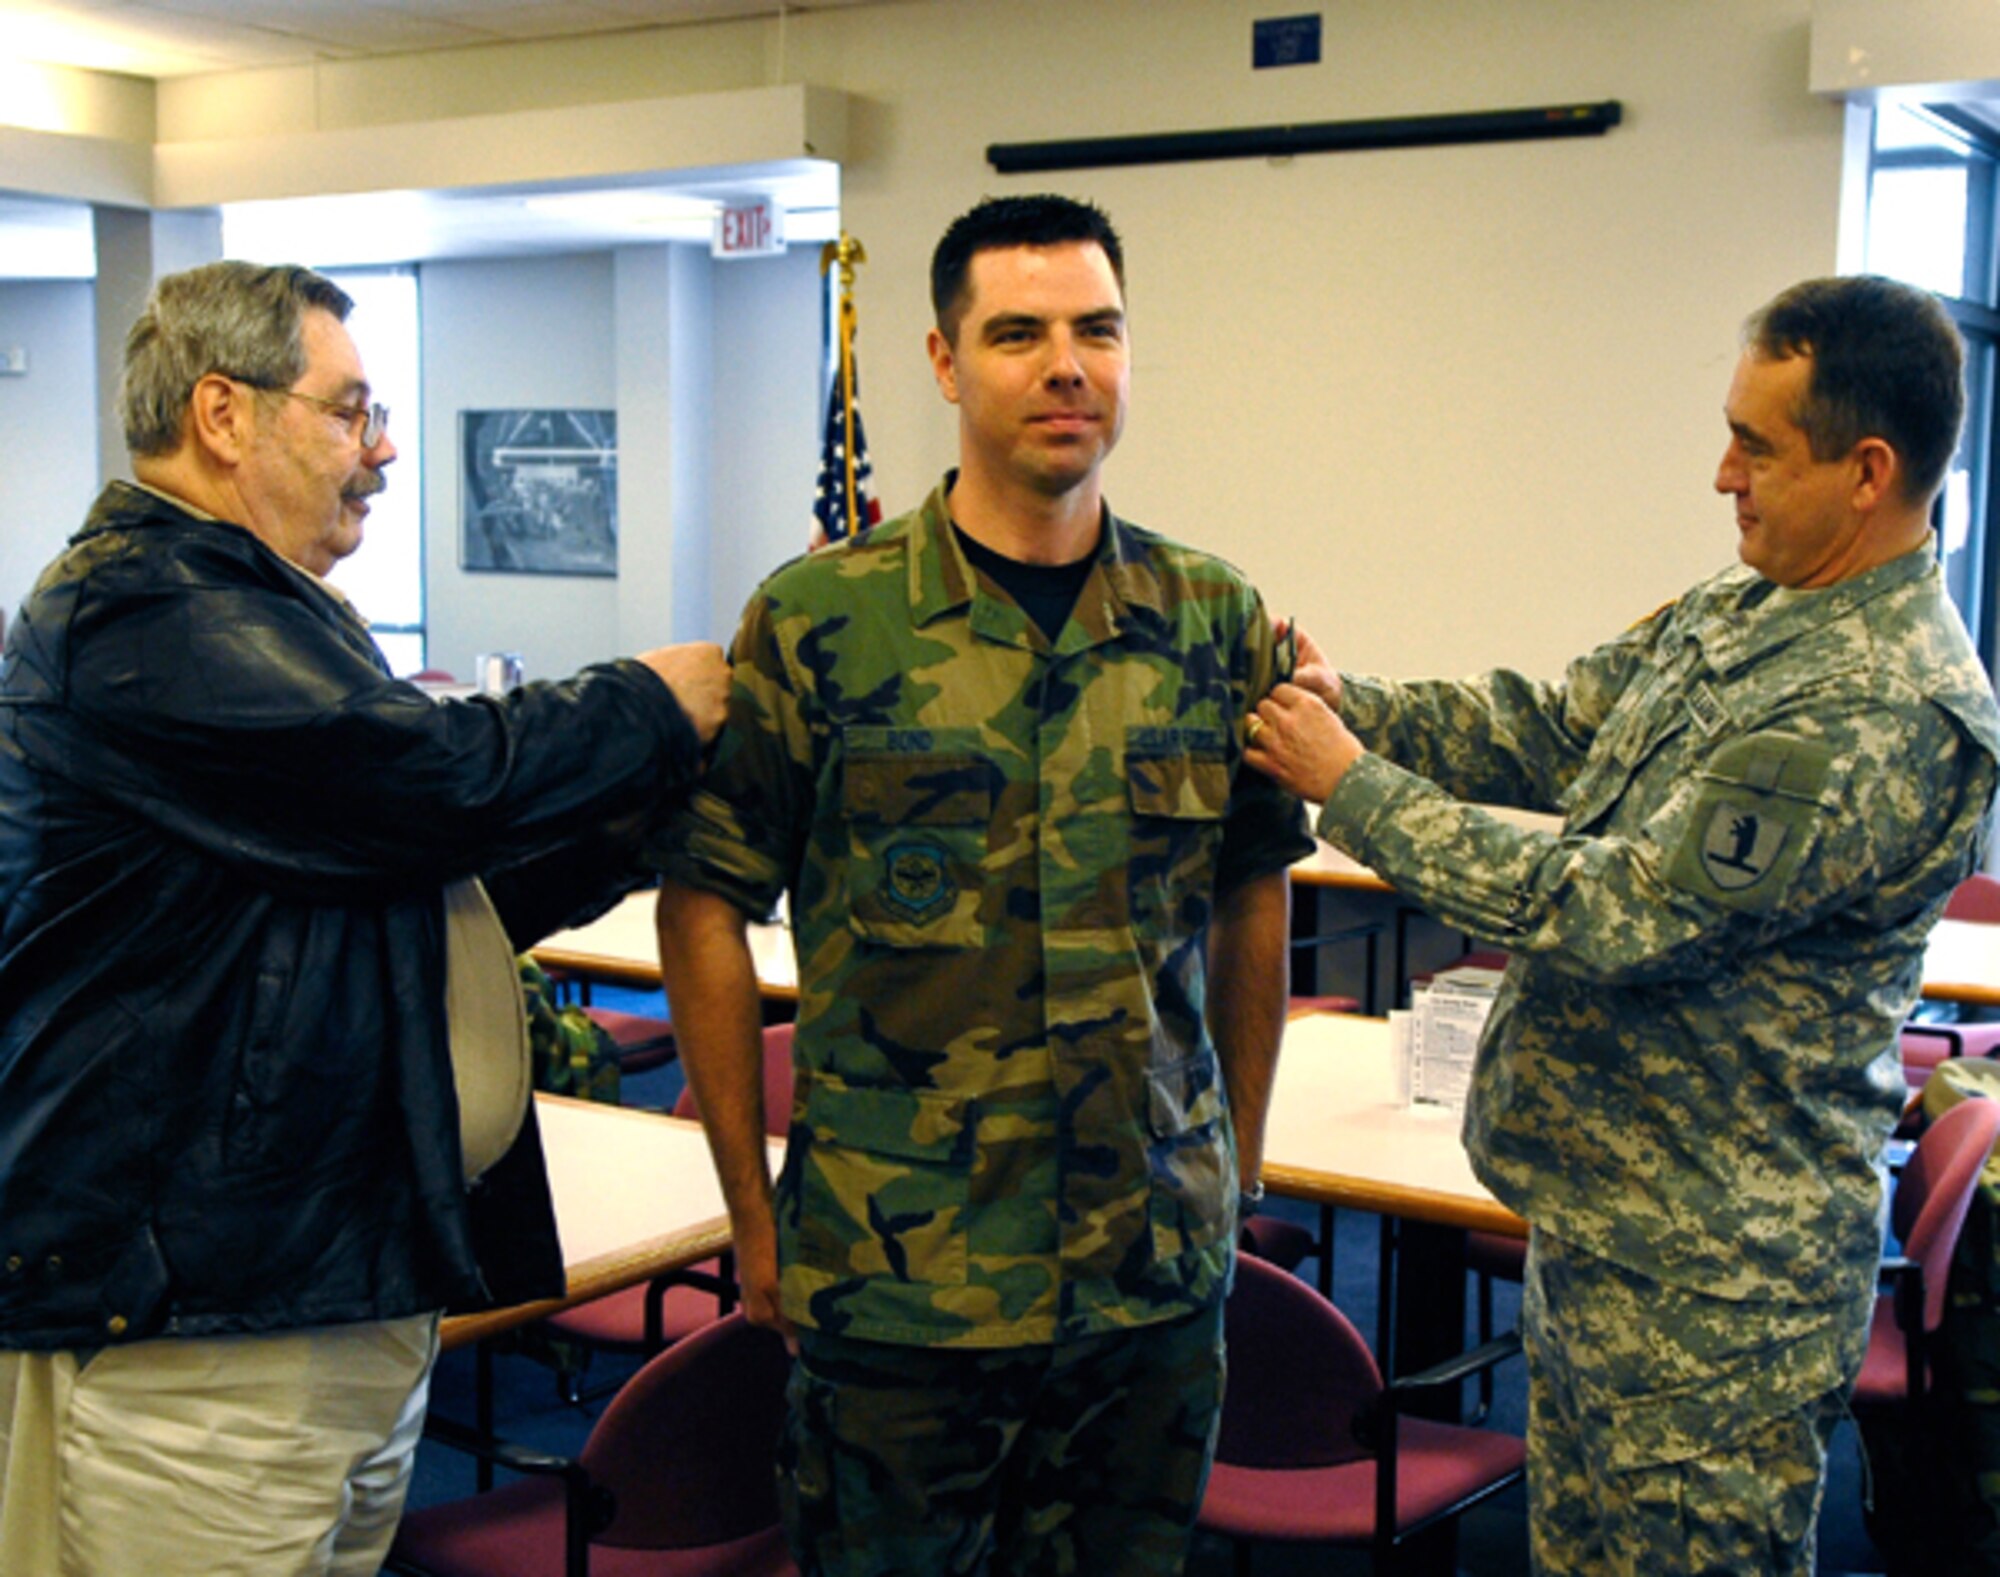 Tech. Sgt. Shannon Bond is awarded Master Sgt. stripes by Brigadier General Stephen Danner, Missouri adjutant general, and his father, George Bond, on 3 April, 2009. (U.S. Air Force photo by Master Sgt. Gregory Kunkle) (RELEASED) 